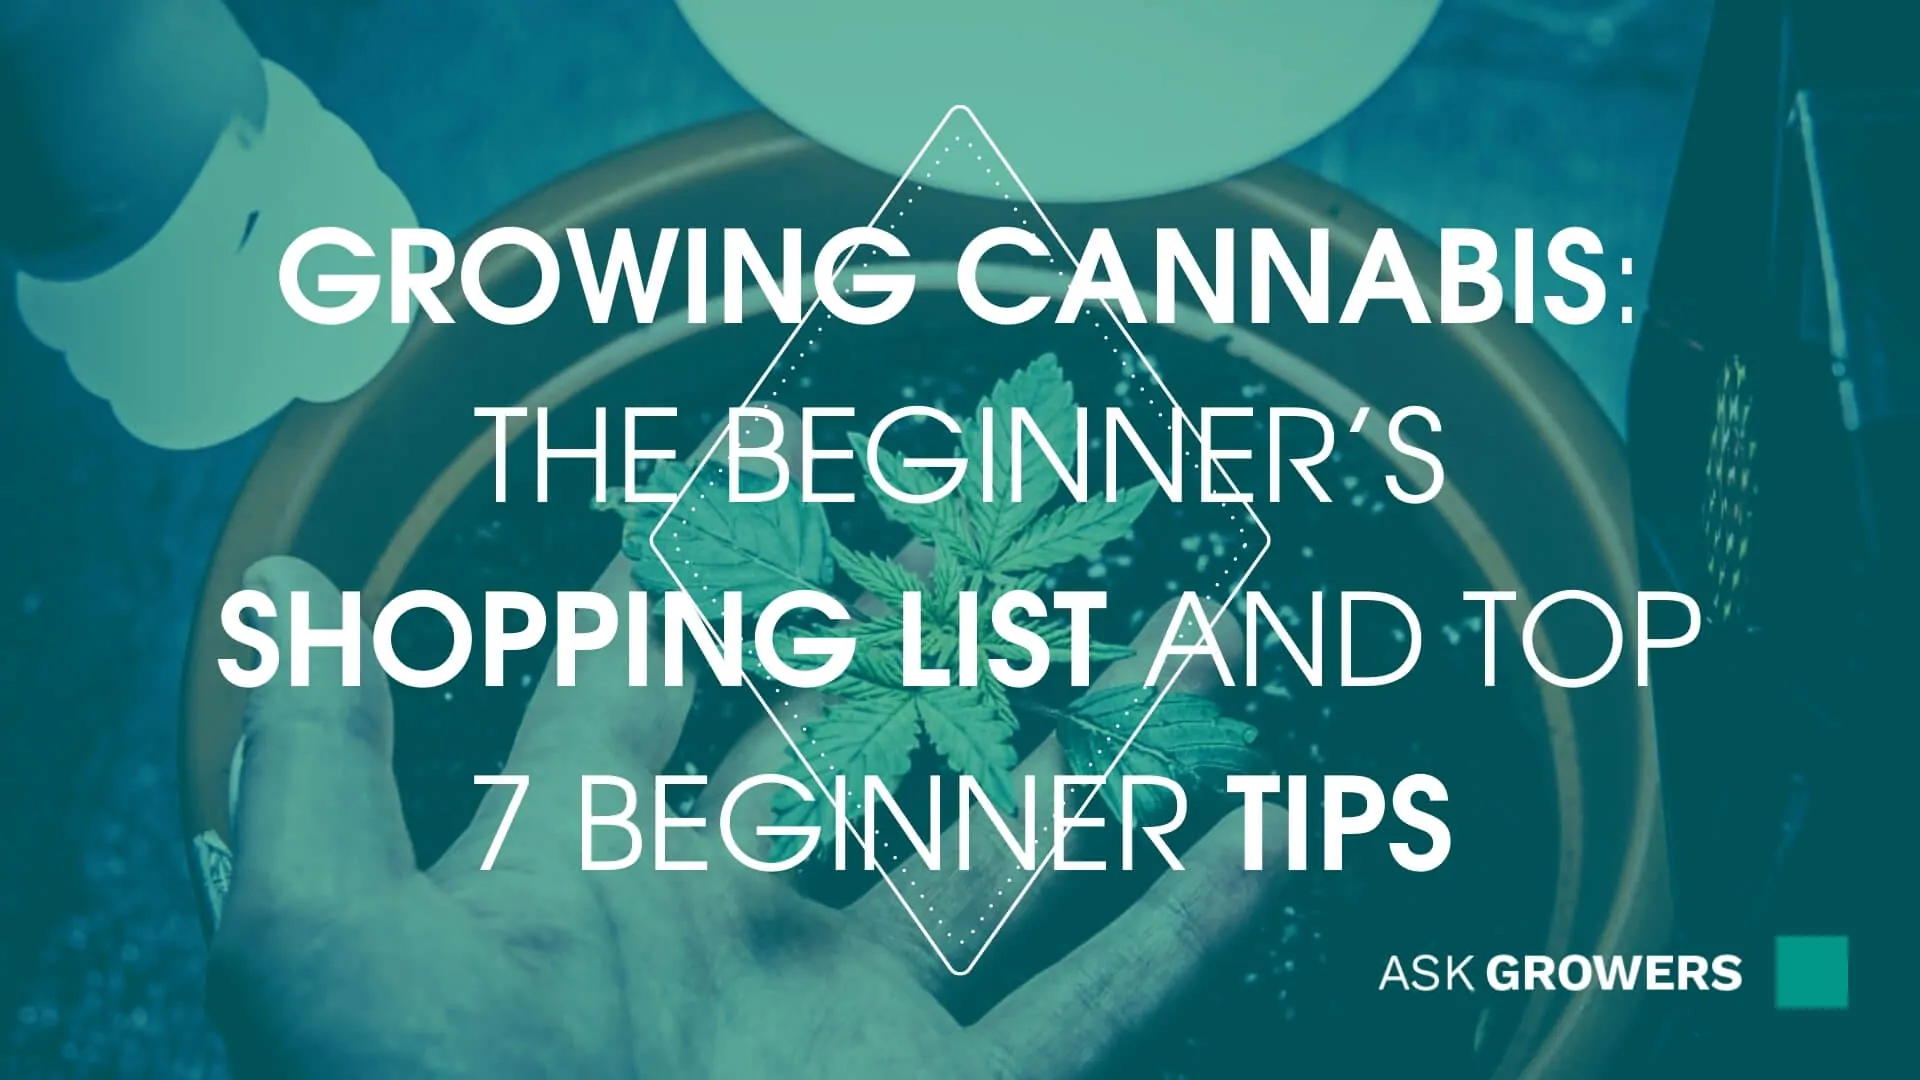 Growing Cannabis: The Beginner's Shopping List and Top 7 Beginner Tips